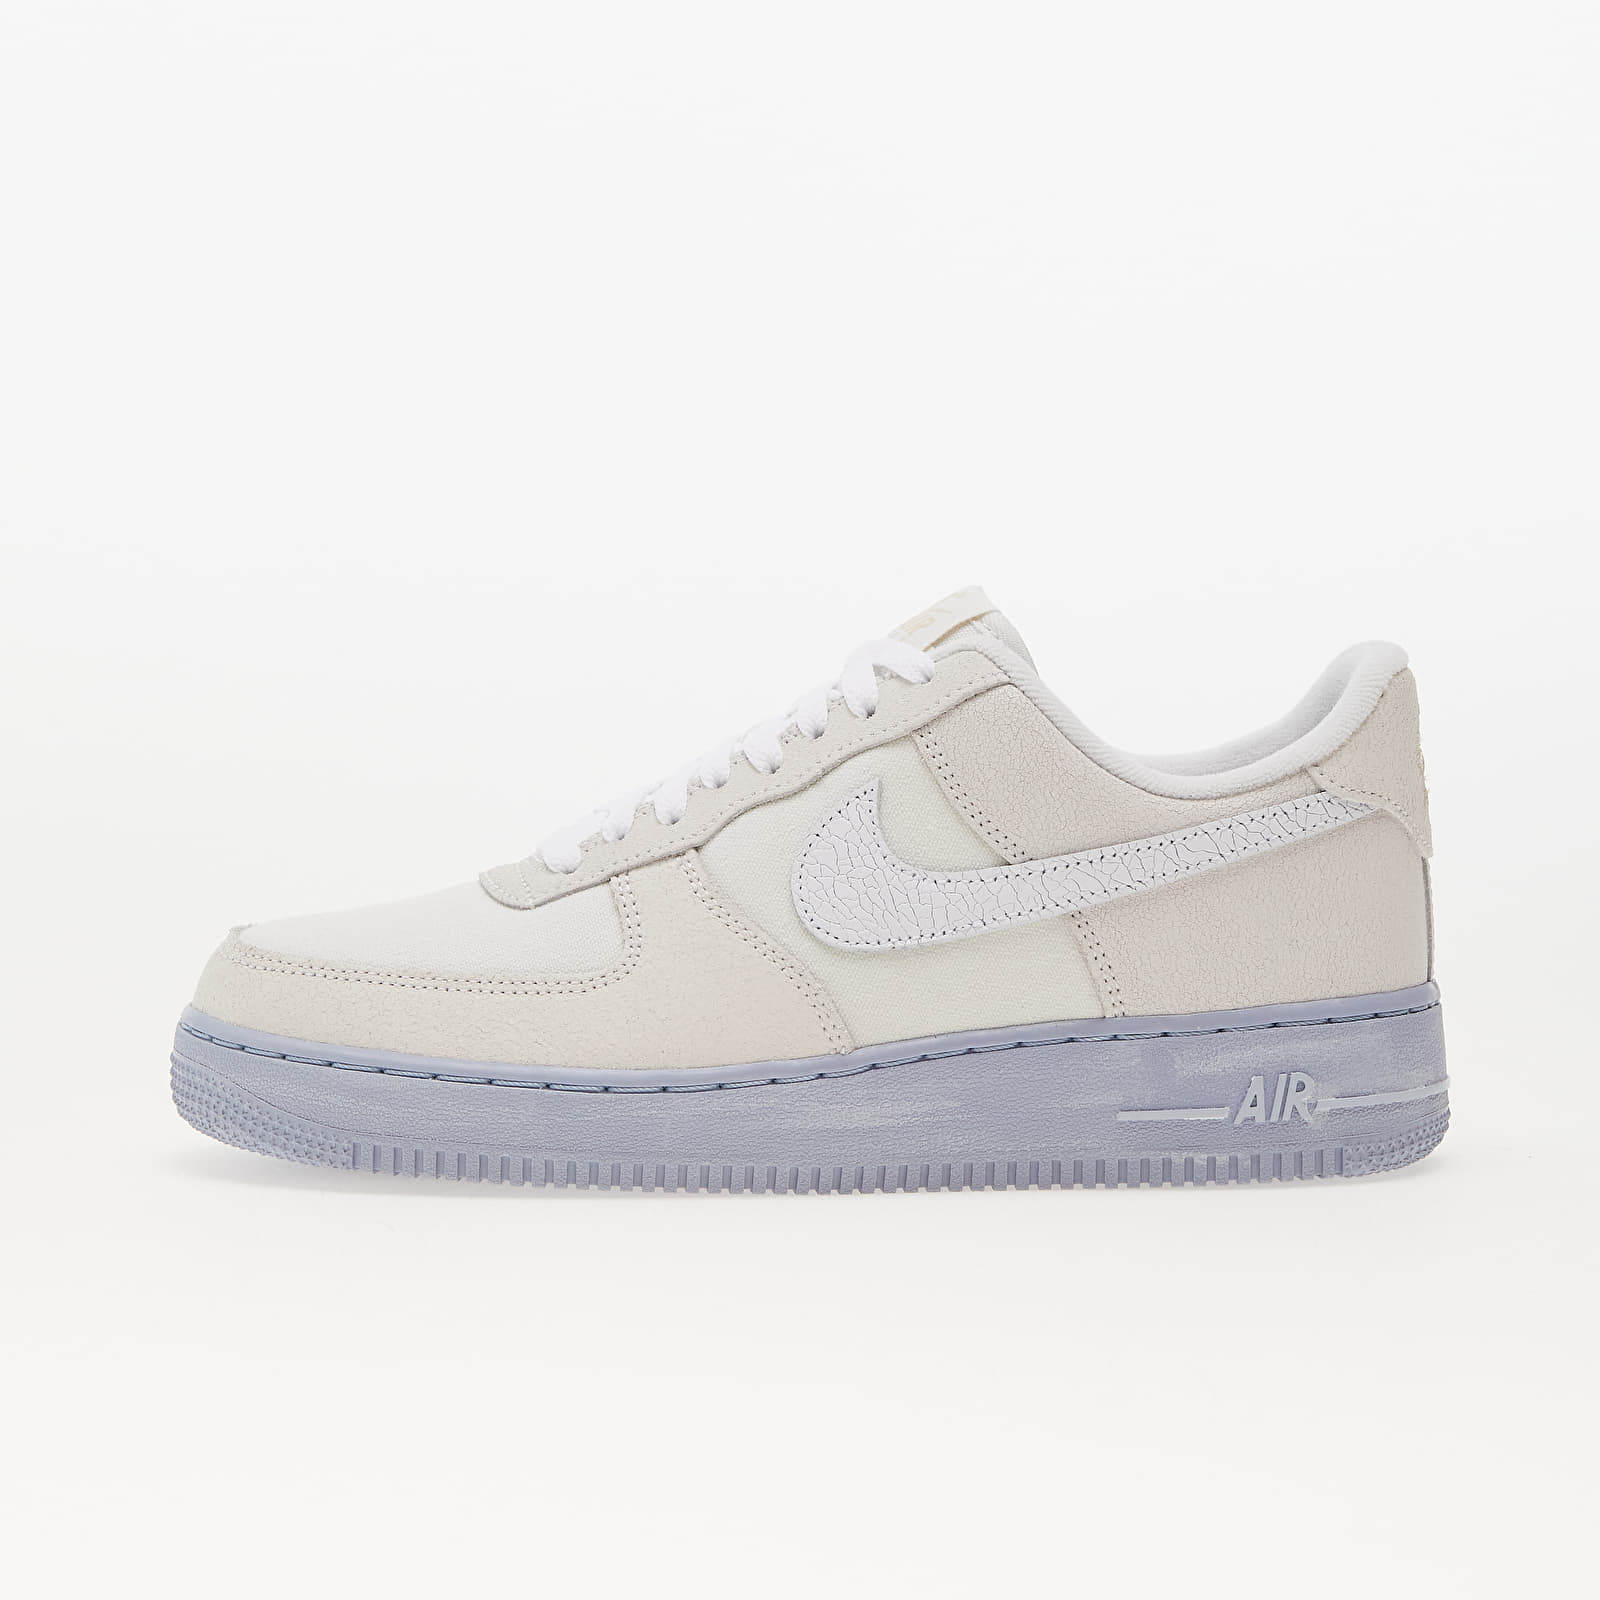 Baskets et chaussures pour hommes Nike Air Force 1 '07 LV8 Emb Summit White/ White-Blue Whisper